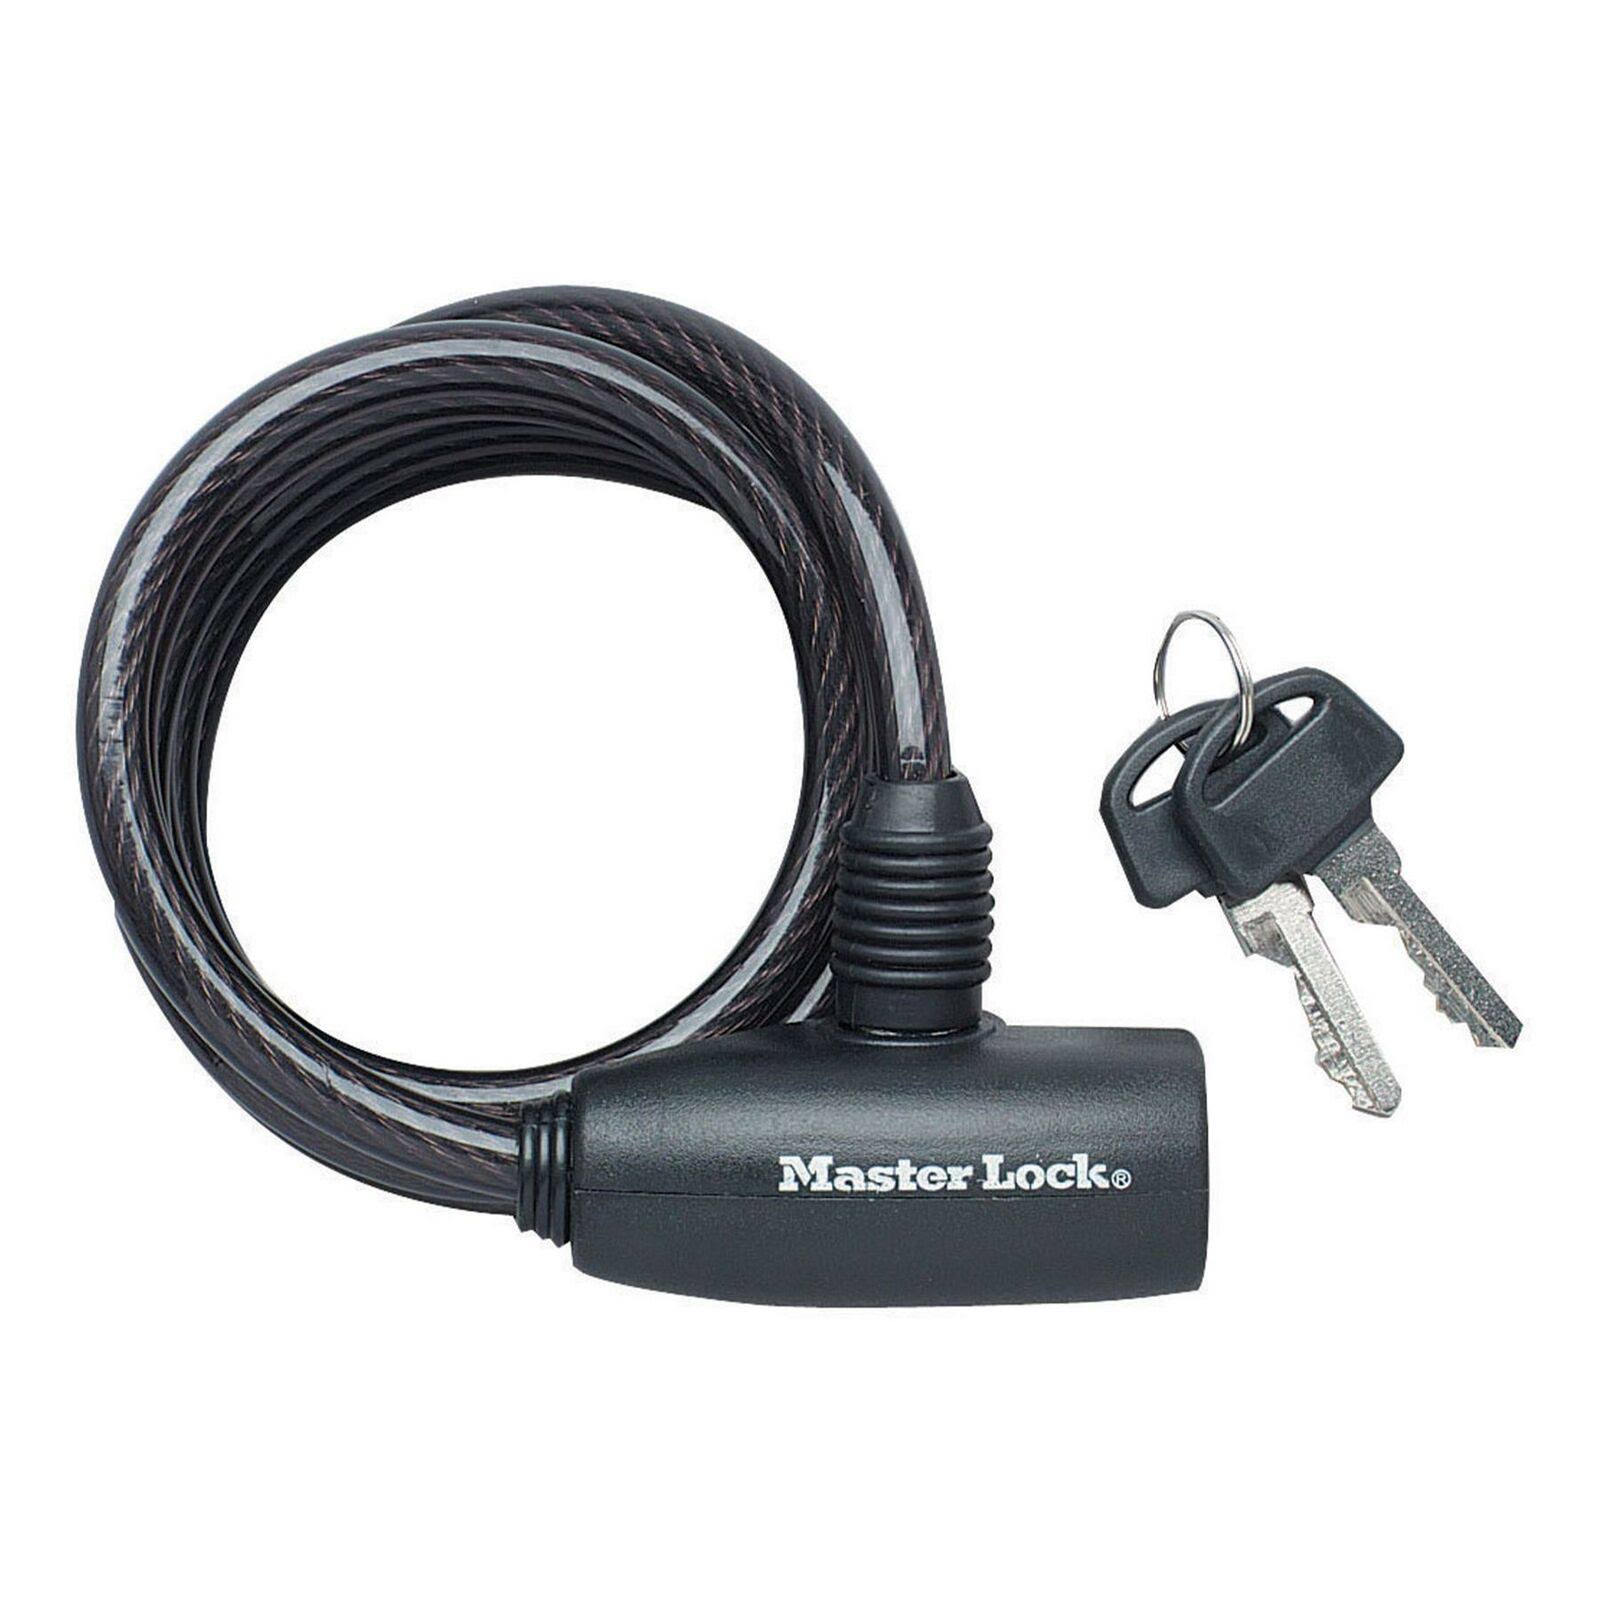 Master Lock Self Coiling Keyed Cable Lock